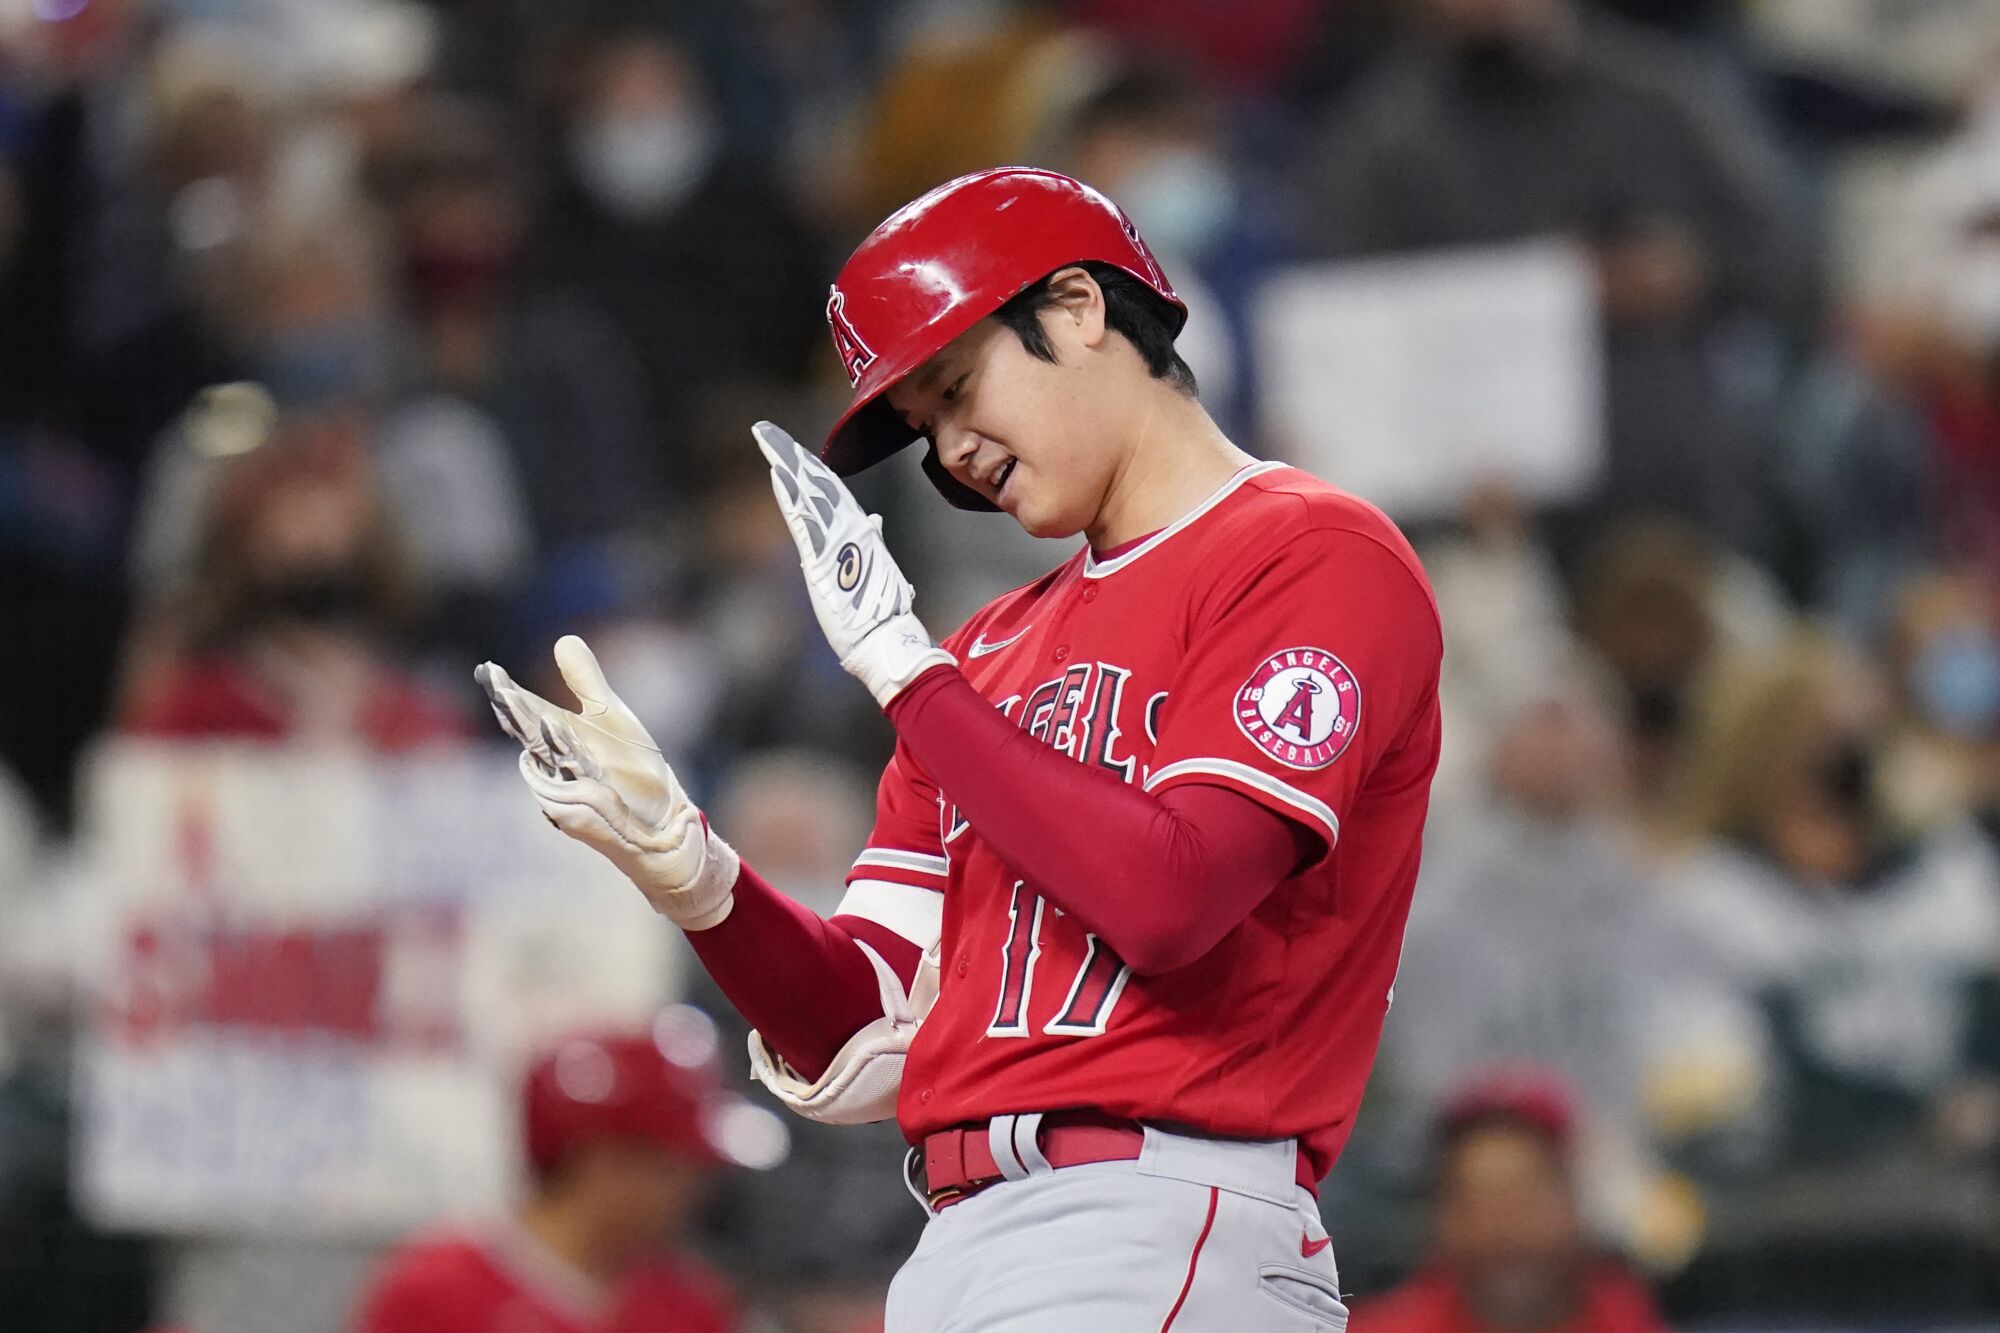 Los Angeles Angels' Shohei Ohtani claps his hands together as he crosses home after a solo home